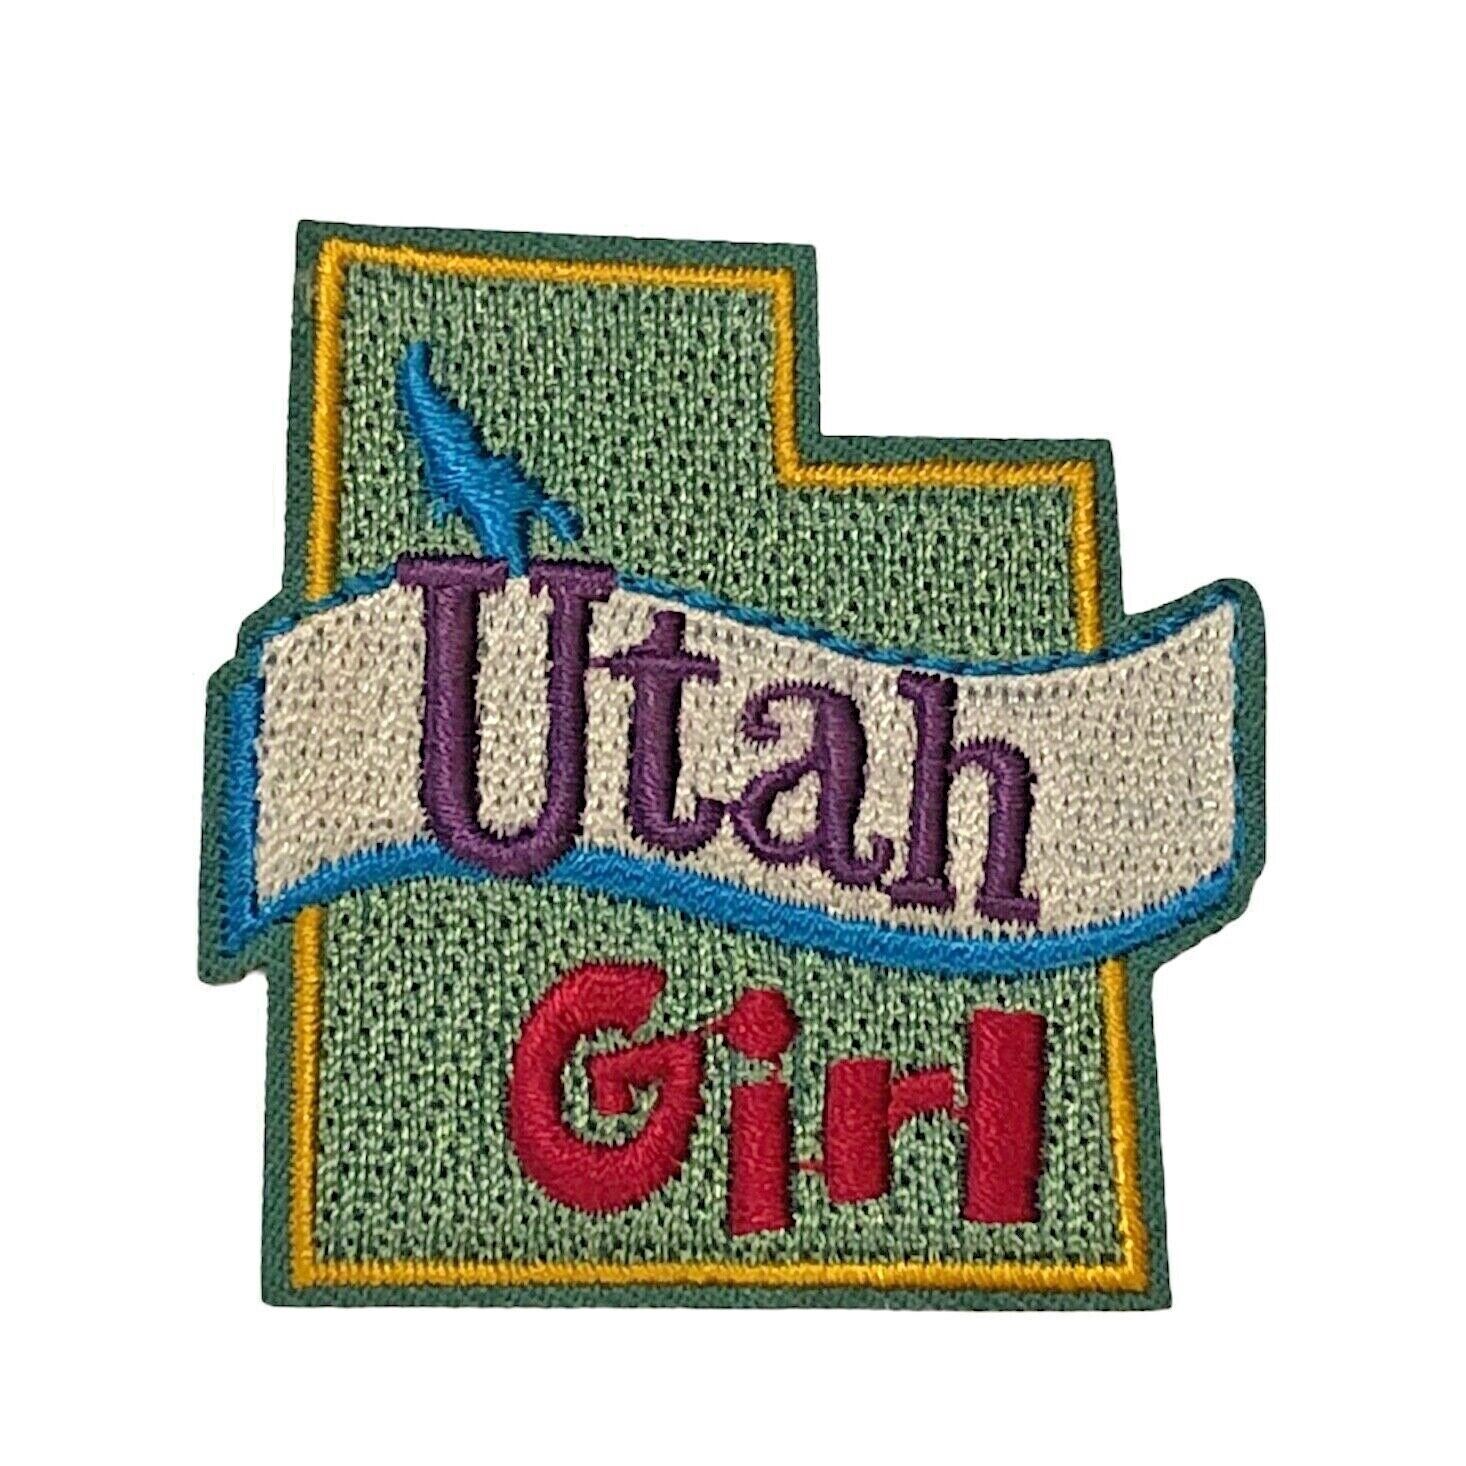 Utah Girl scouting style State Badge 2 inch Patch AVA2378 F2D32J